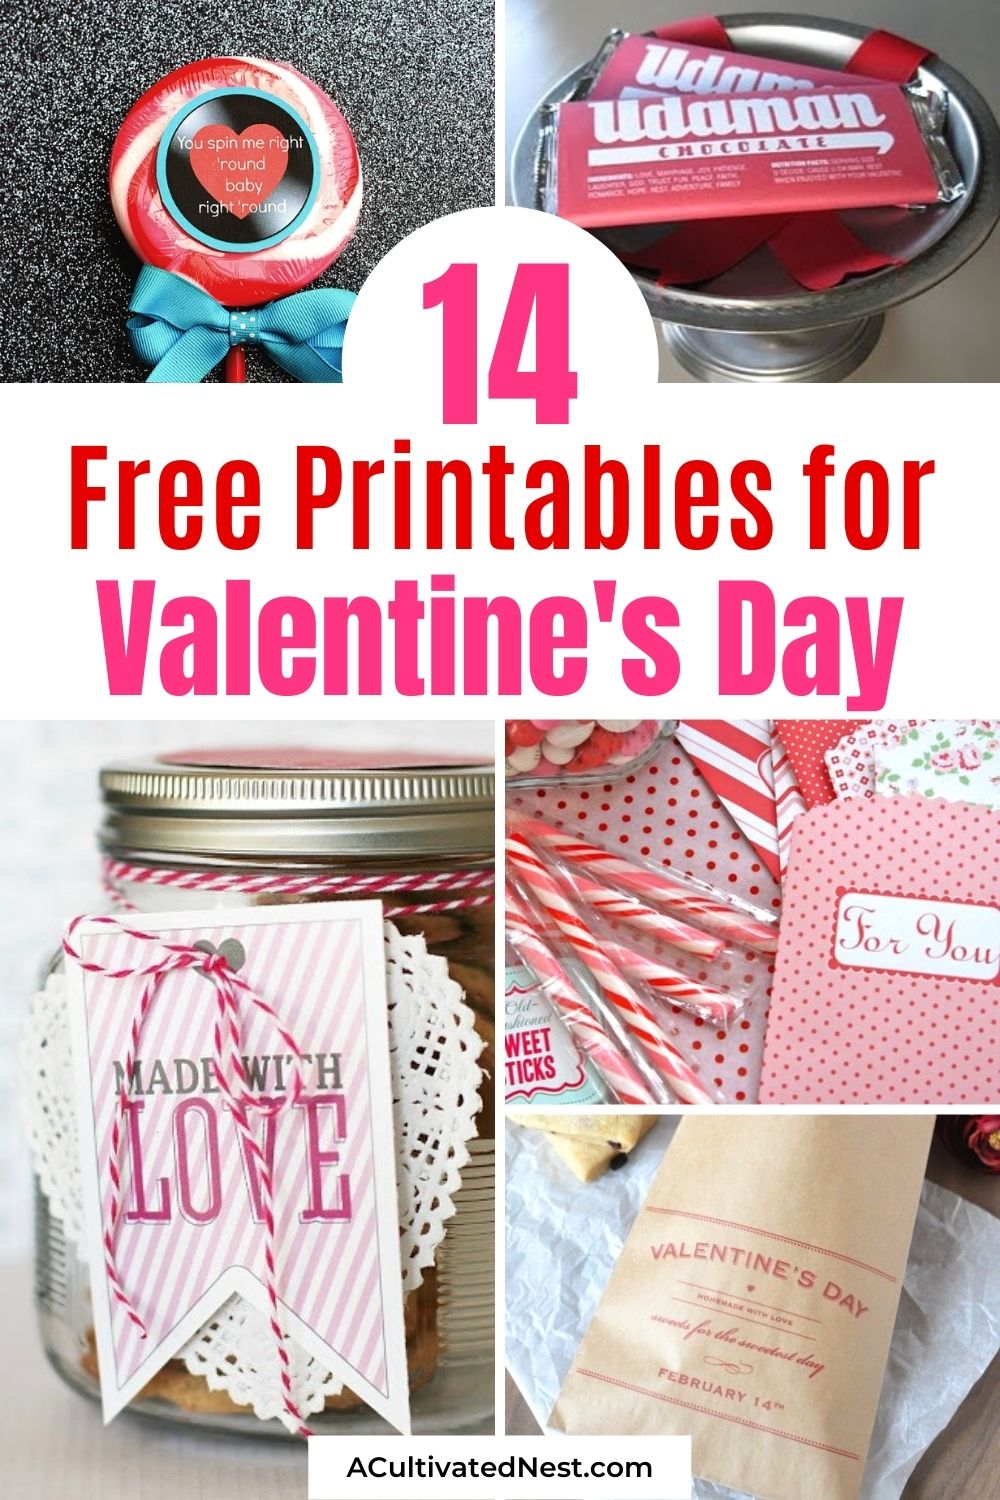 14 Free Valentine's Day Printables- Easily make Valentine's day special on a budget with these free Valentine's Day printables! This great roundup includes lovely free printable gift tags, wall art, and more! | #freePrintables #ValentinesDay #printables #giftTags #ACultivatedNest